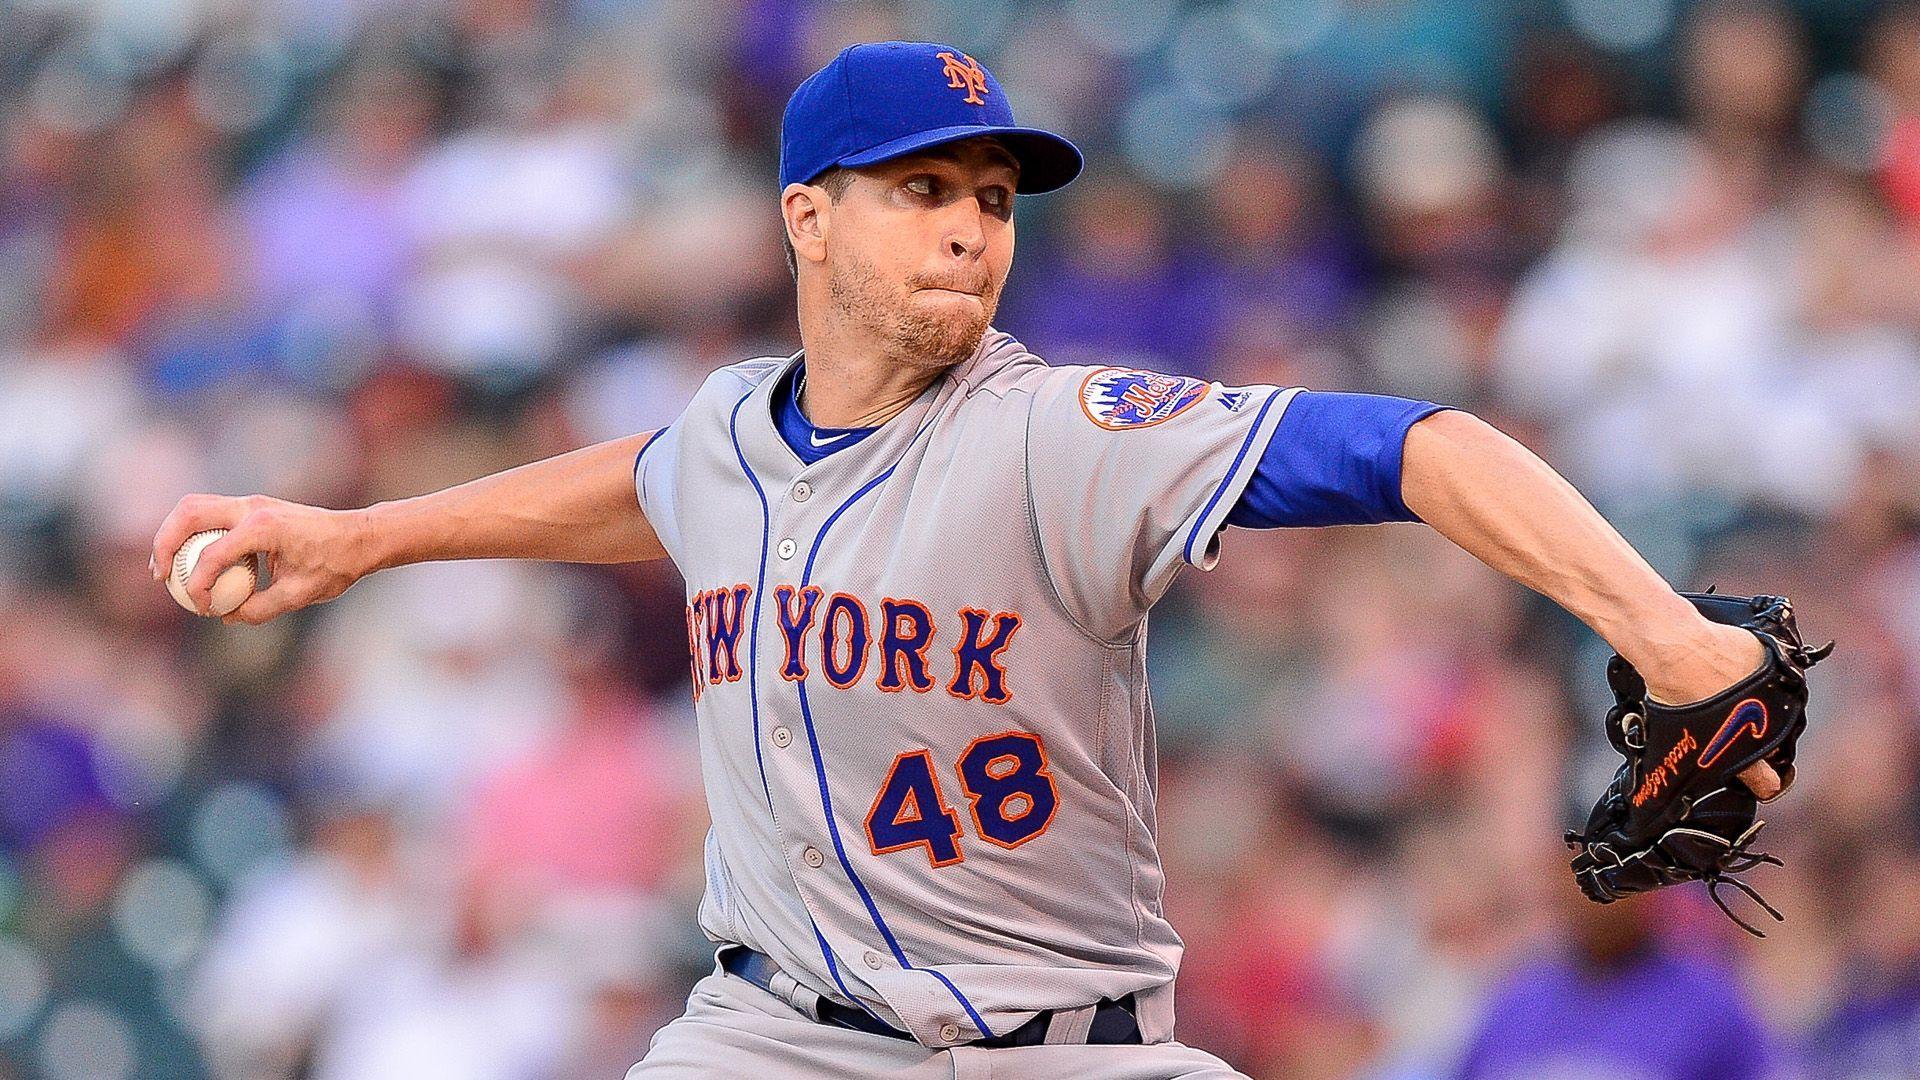 Jacob deGrom's Blue Jersey and Long Hair: A Winning Combination for the Mets - wide 6